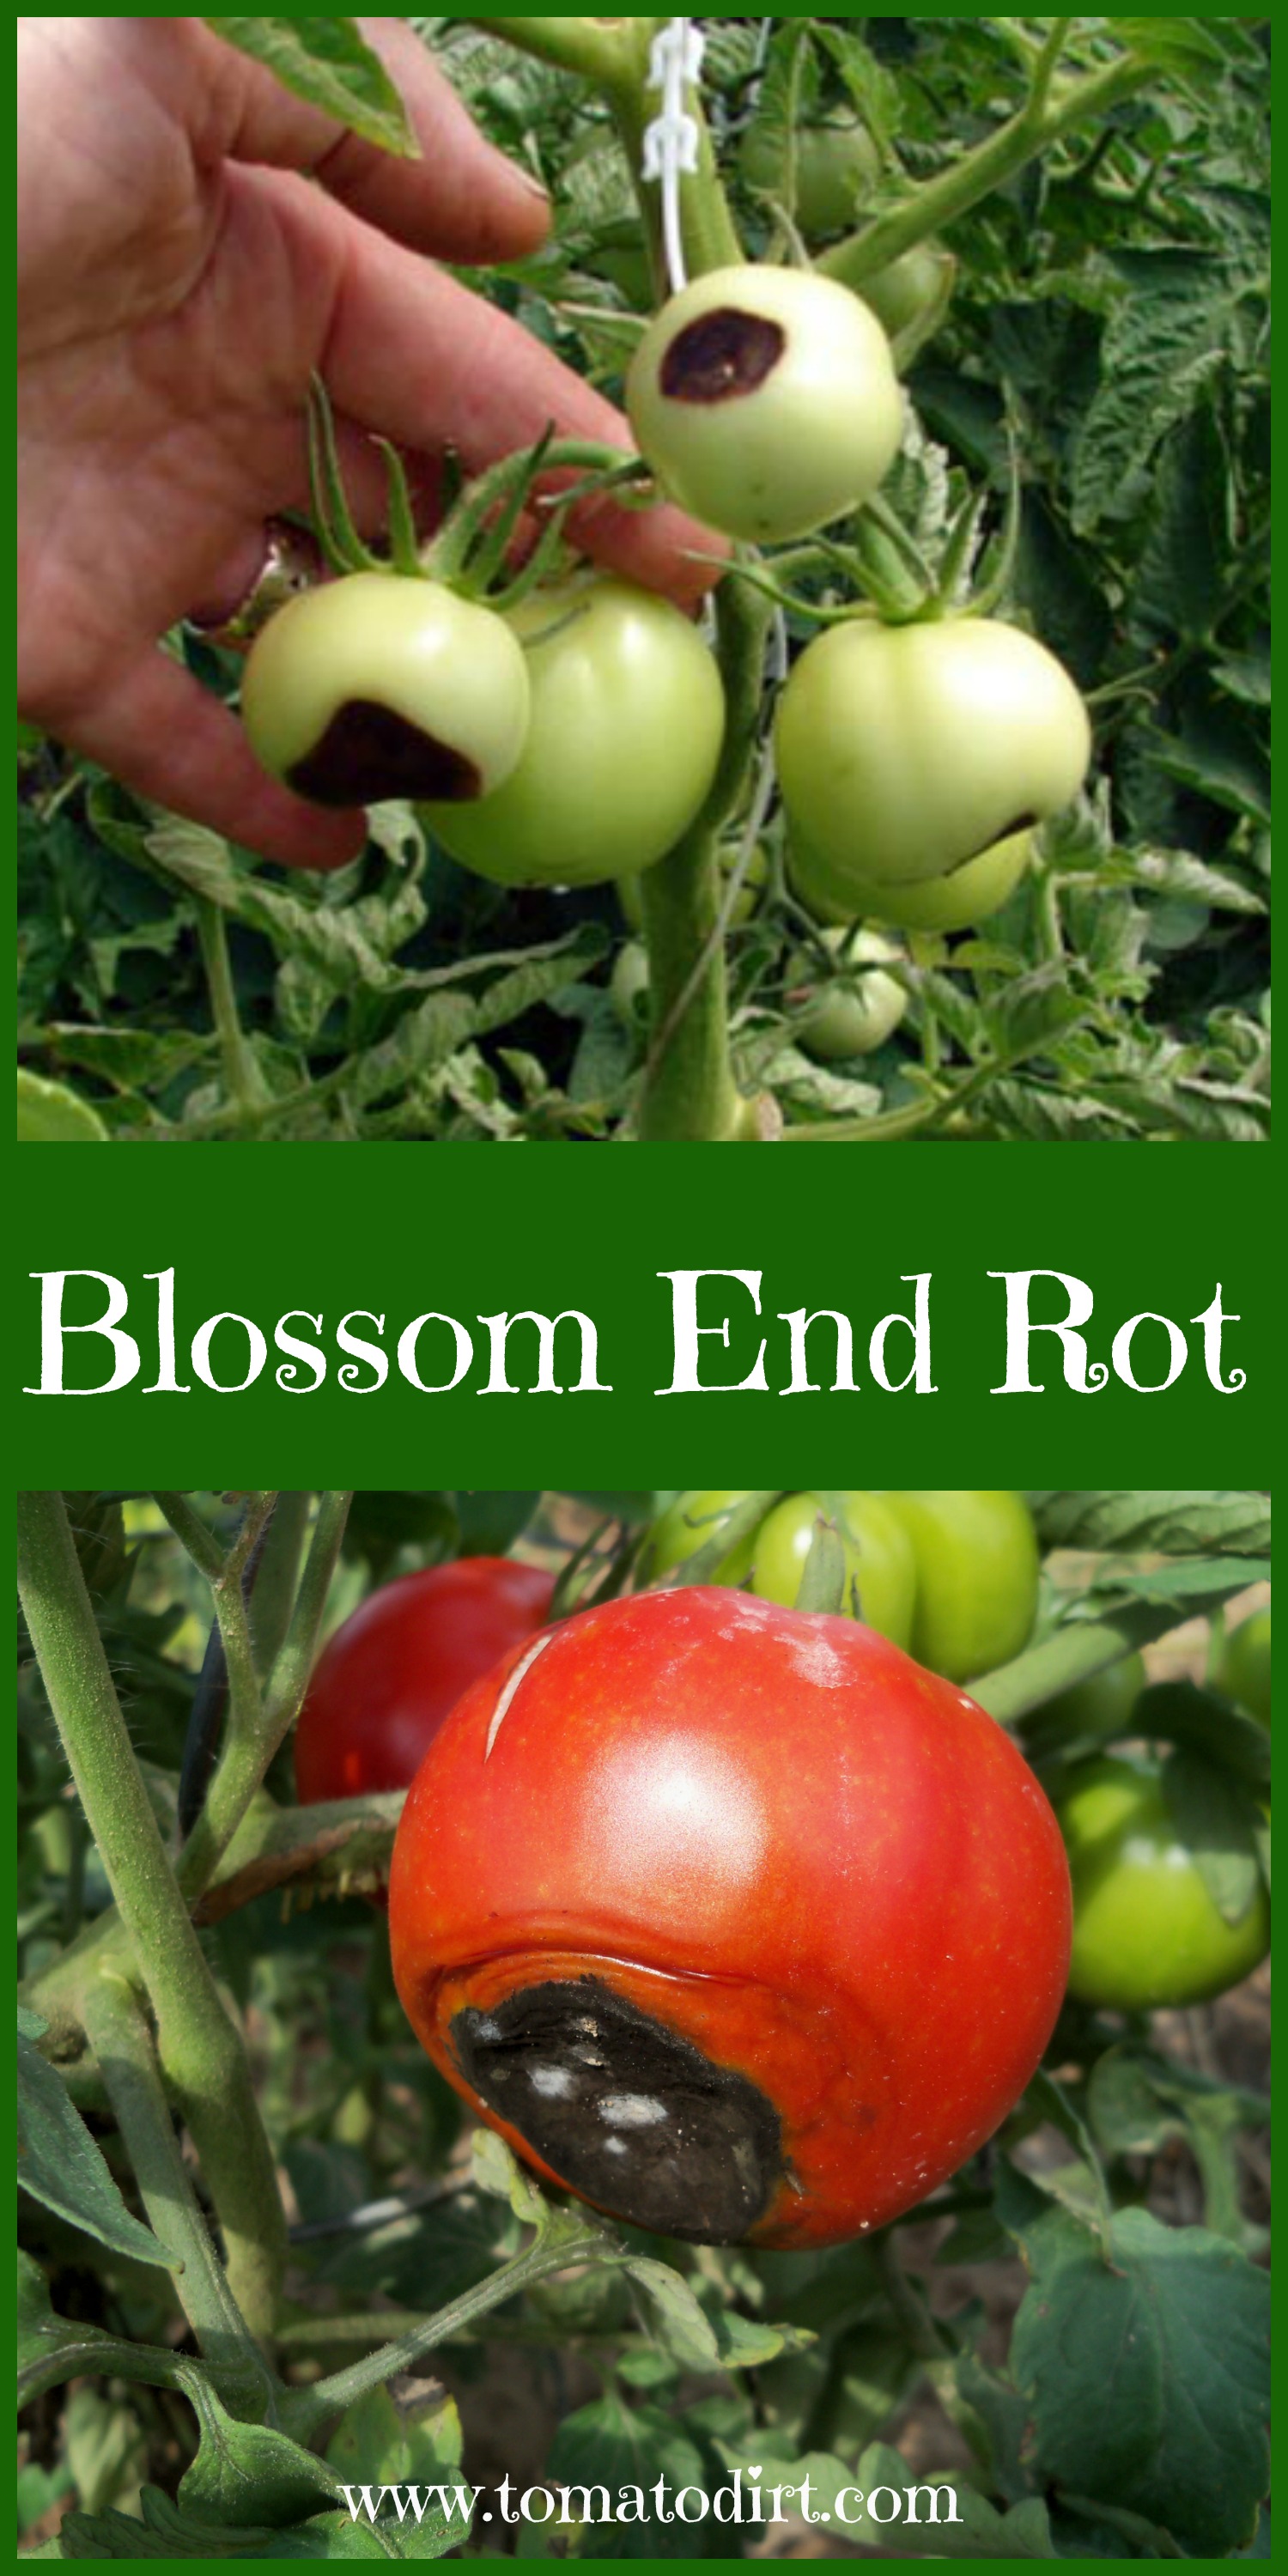 Blossom End Rot with Tomato Dirt